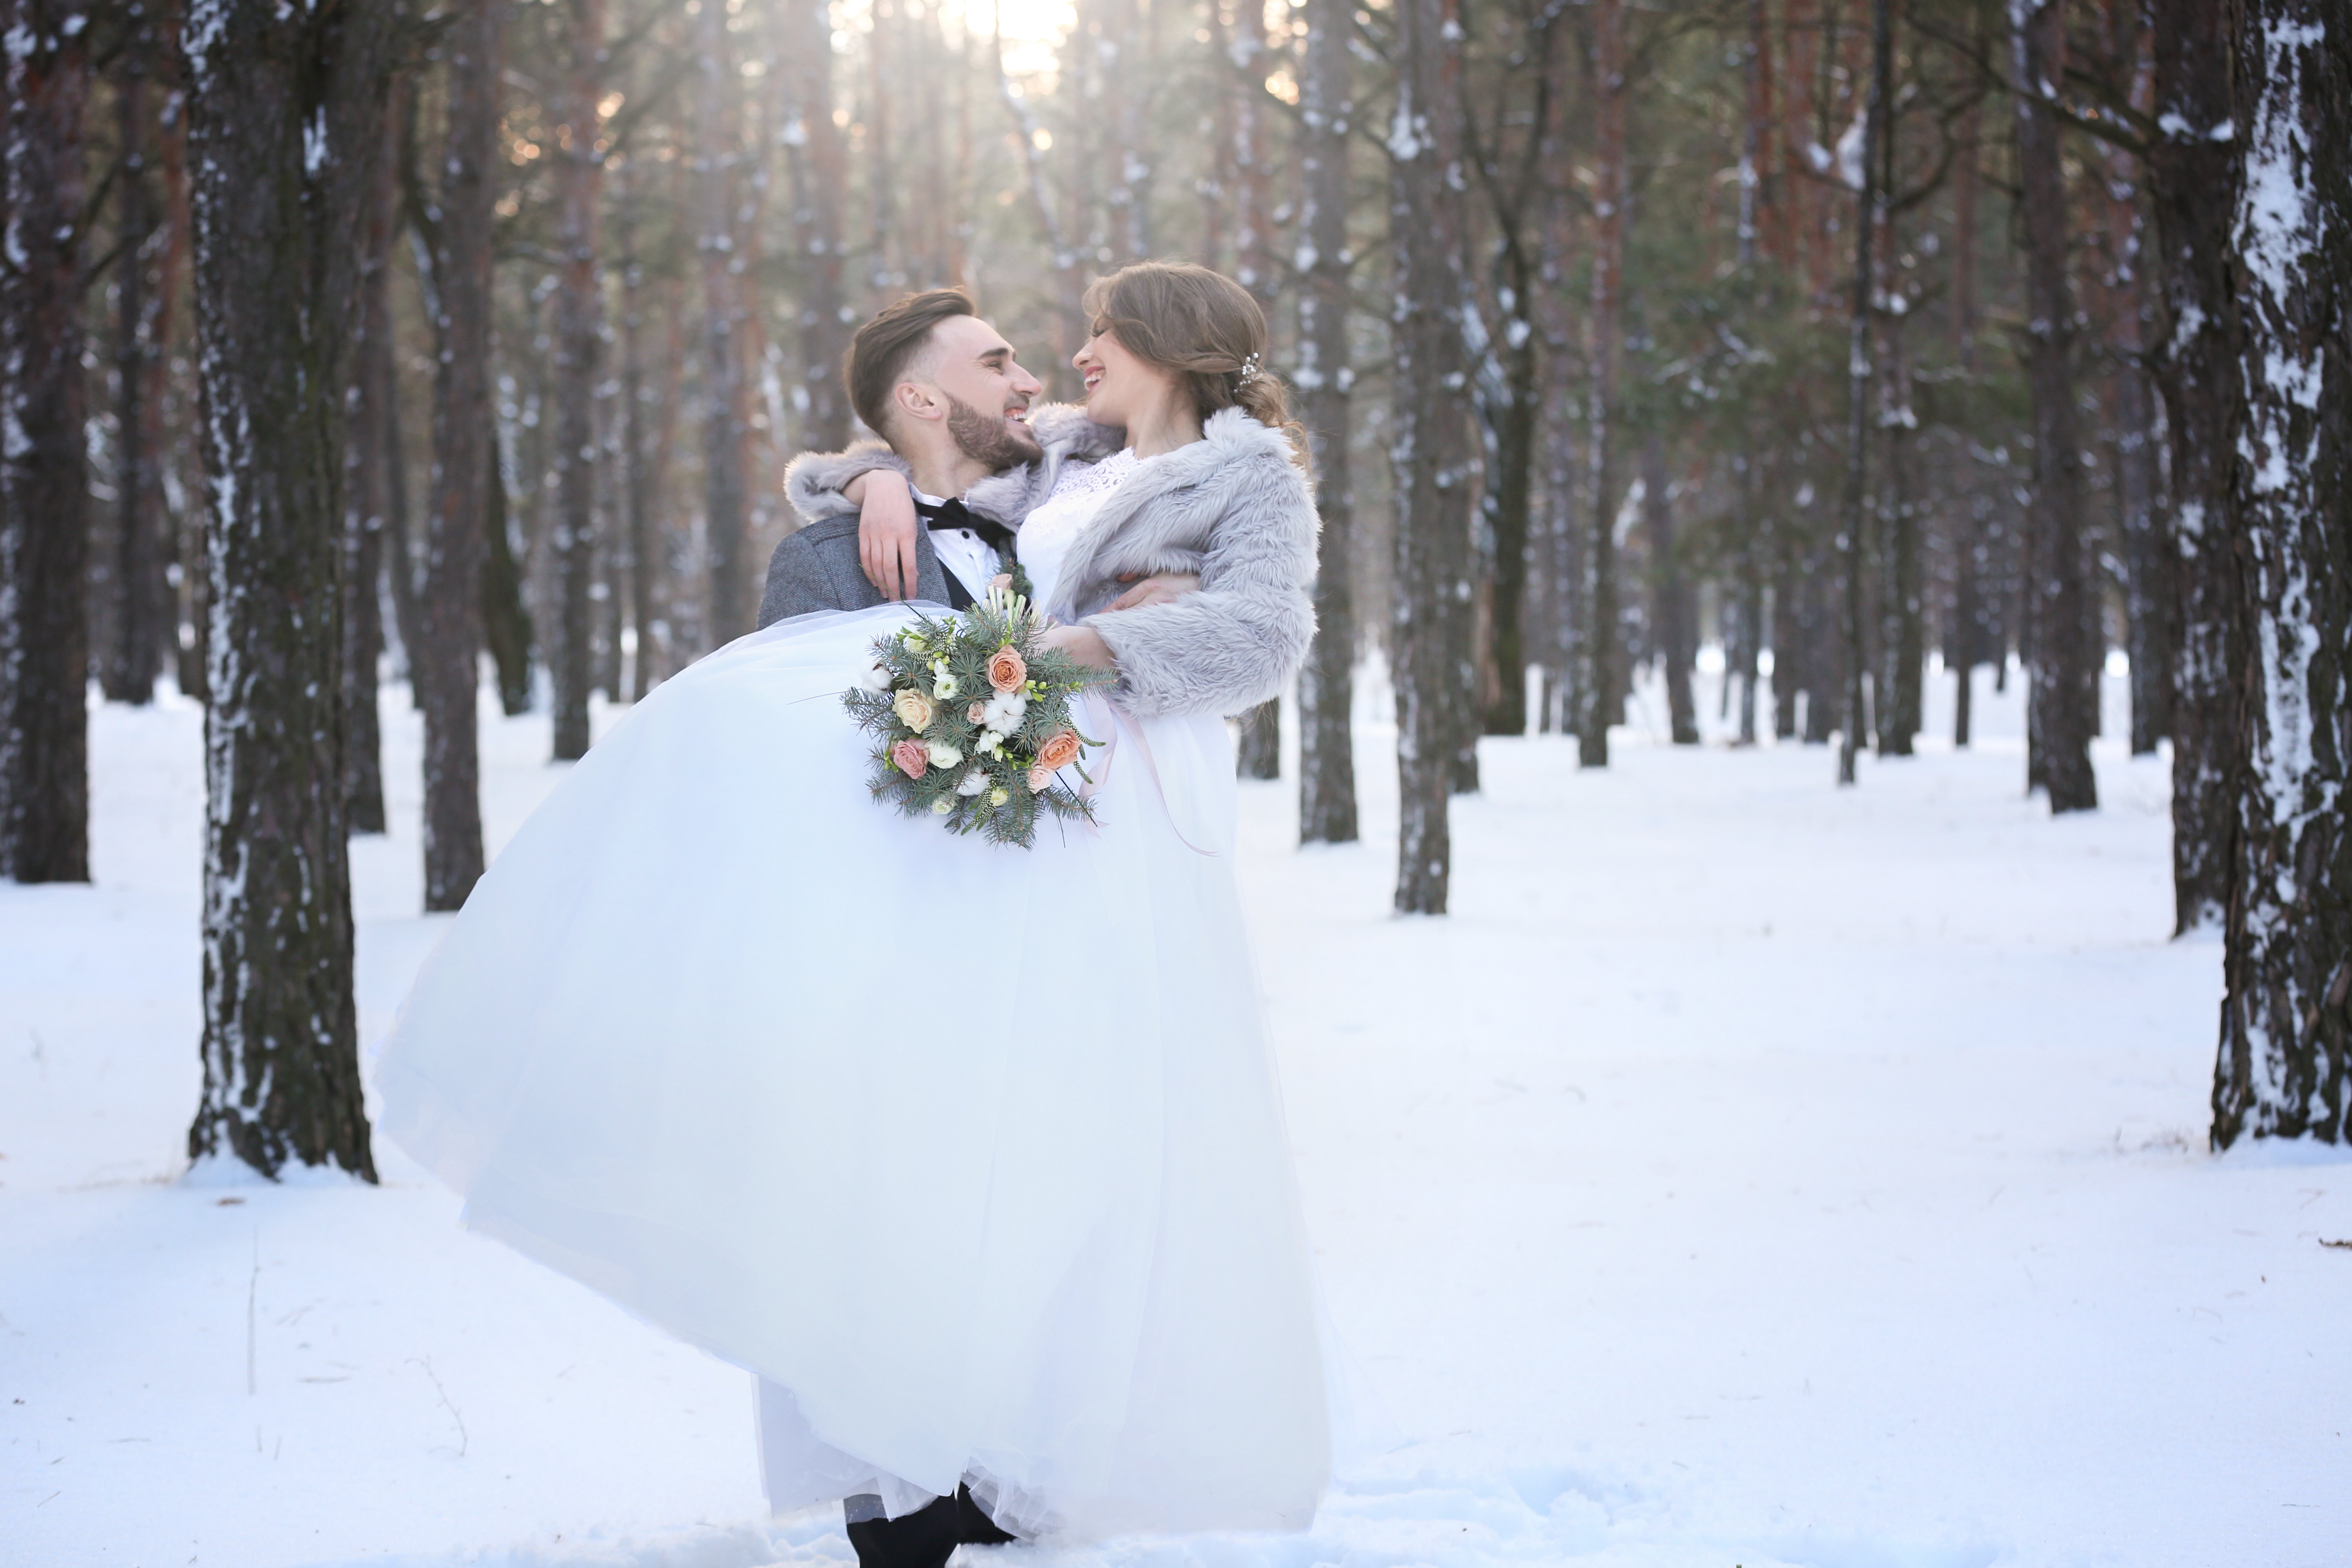 couple embracing in the snow at their winter wedding